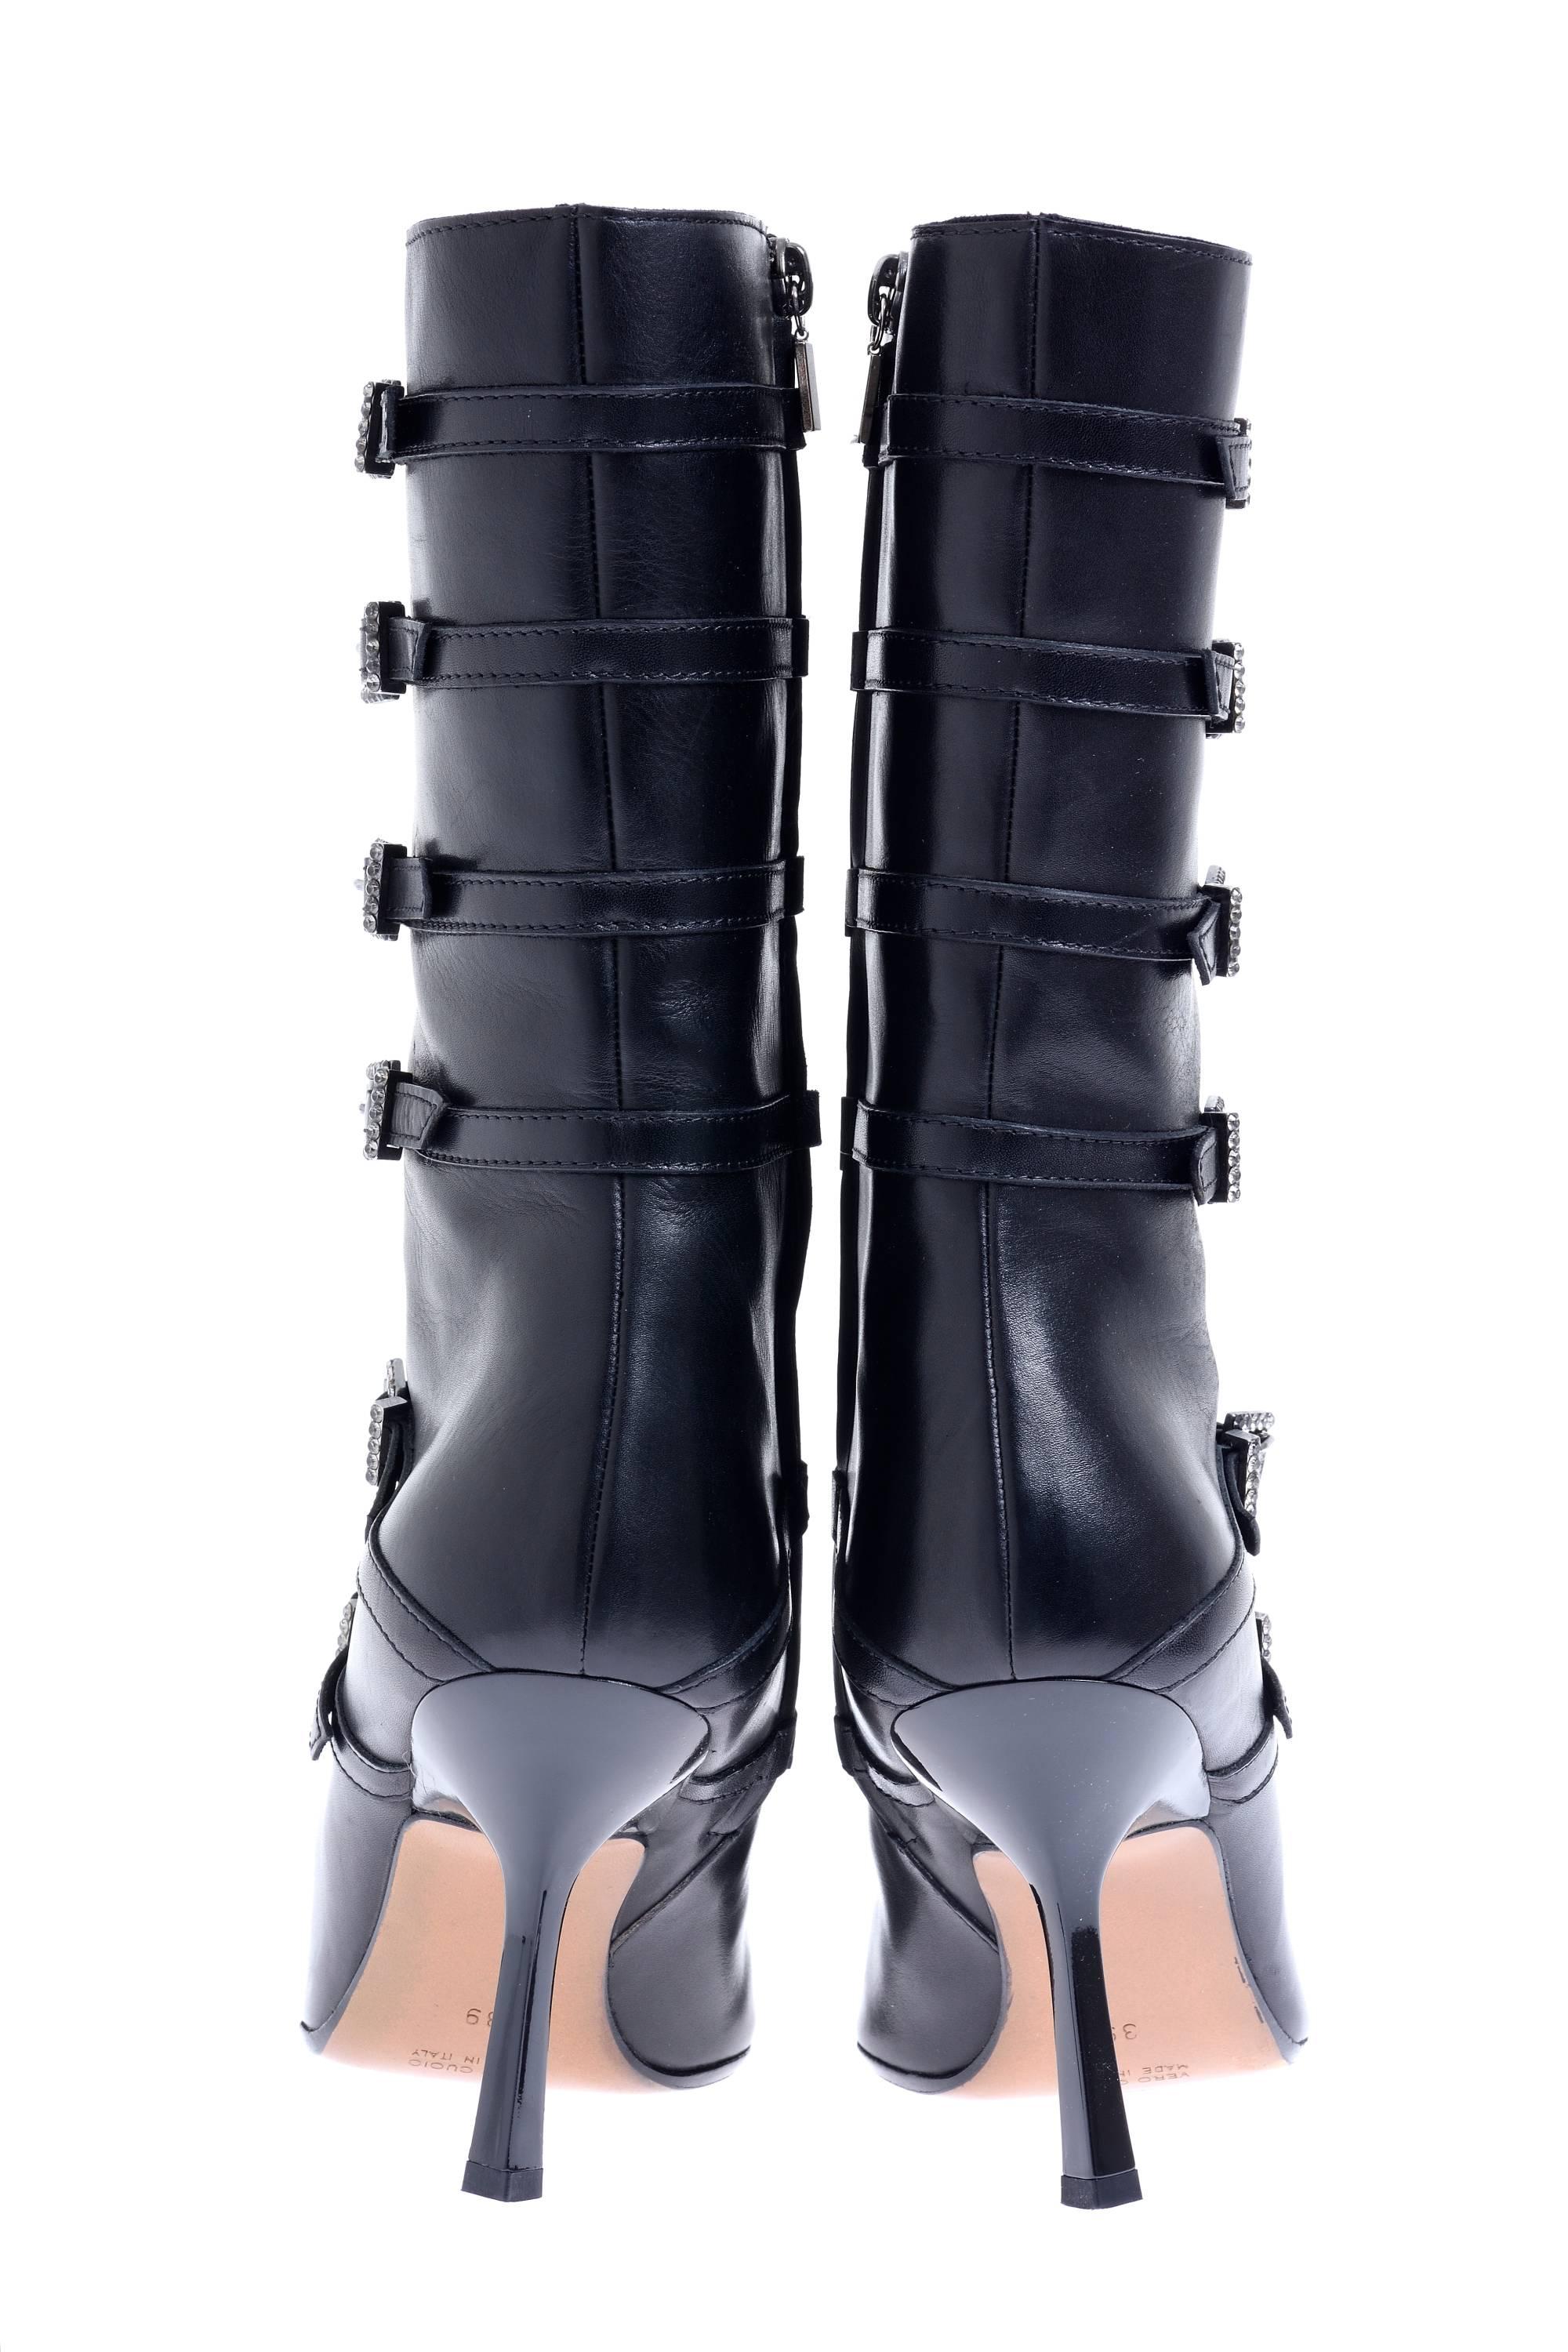 RENE CAOVILLA Black Leather Buckles High Heel Boots EU 39 In New Condition For Sale In Milan, Italy